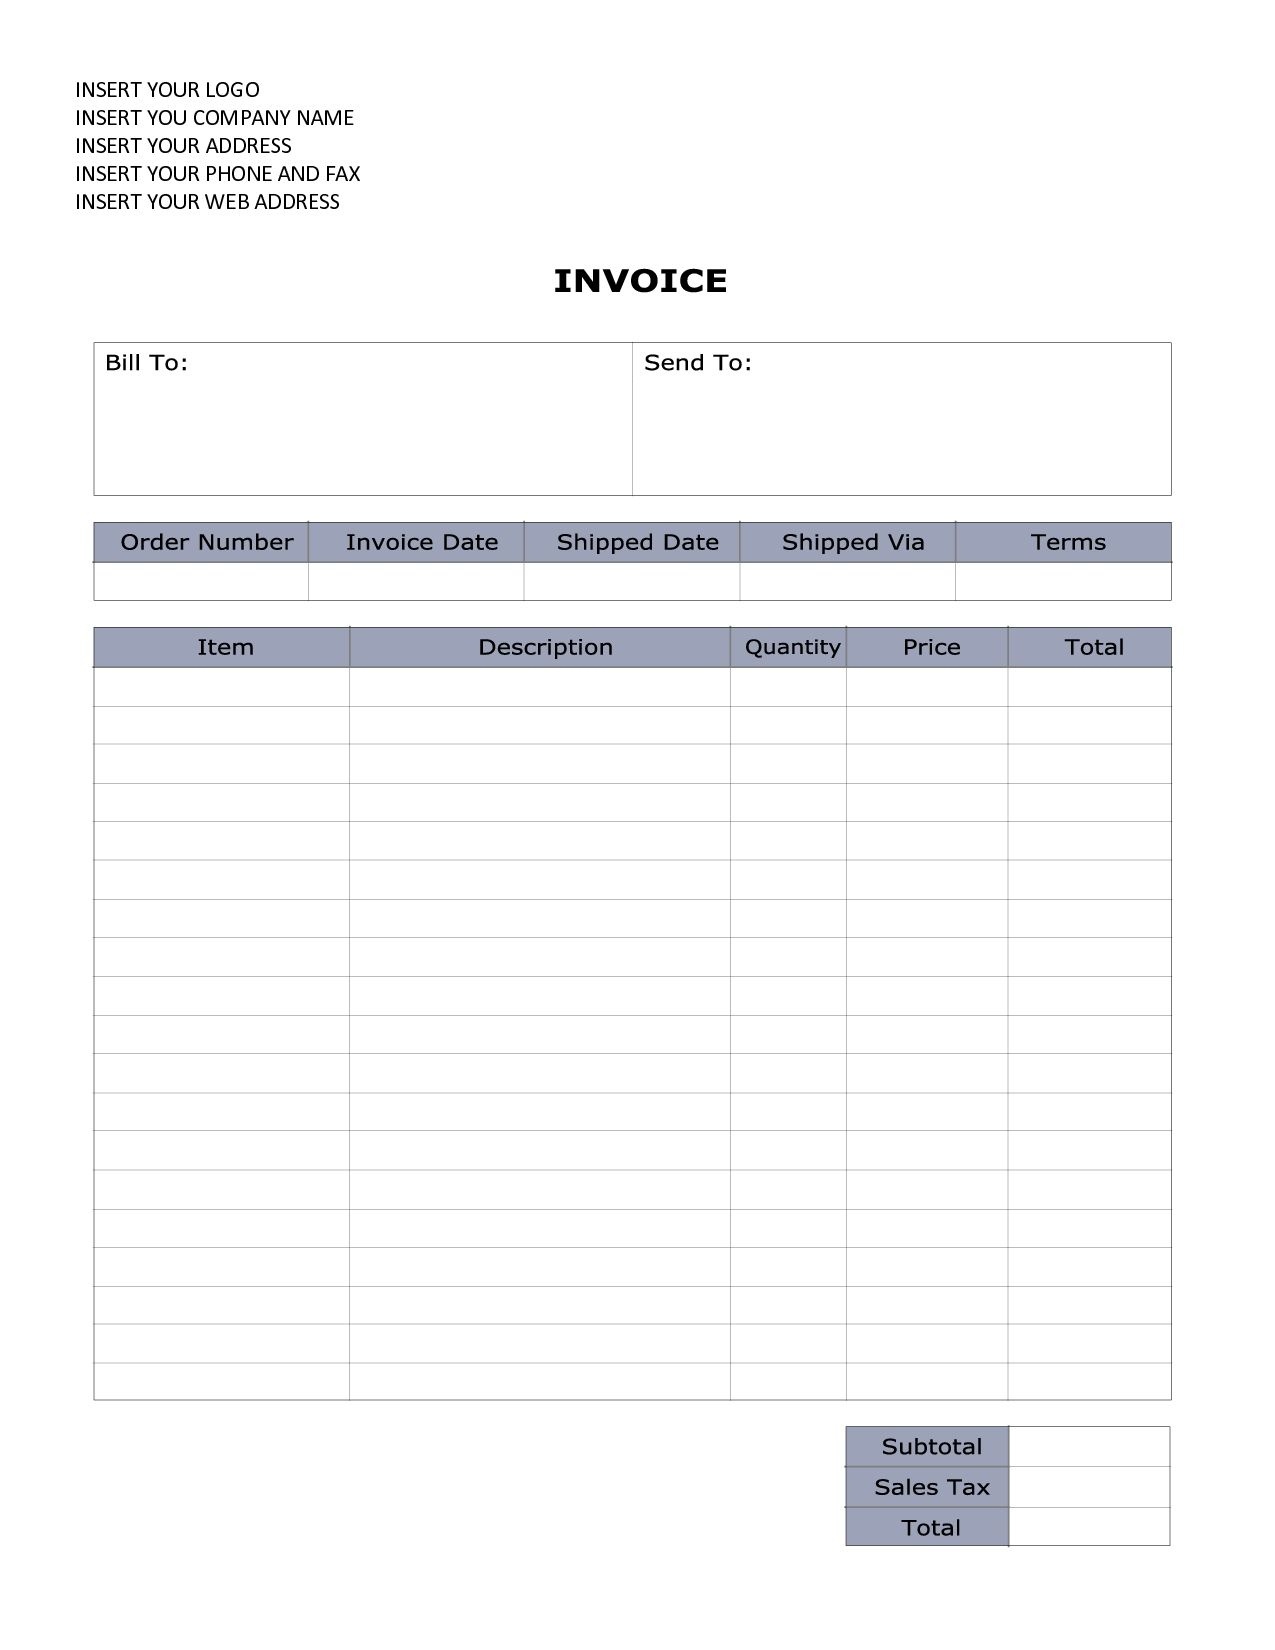 Word Document Invoice Template Sales Invoice Sample Word Olbghygl - Invoice Templates Printable Free Word Doc